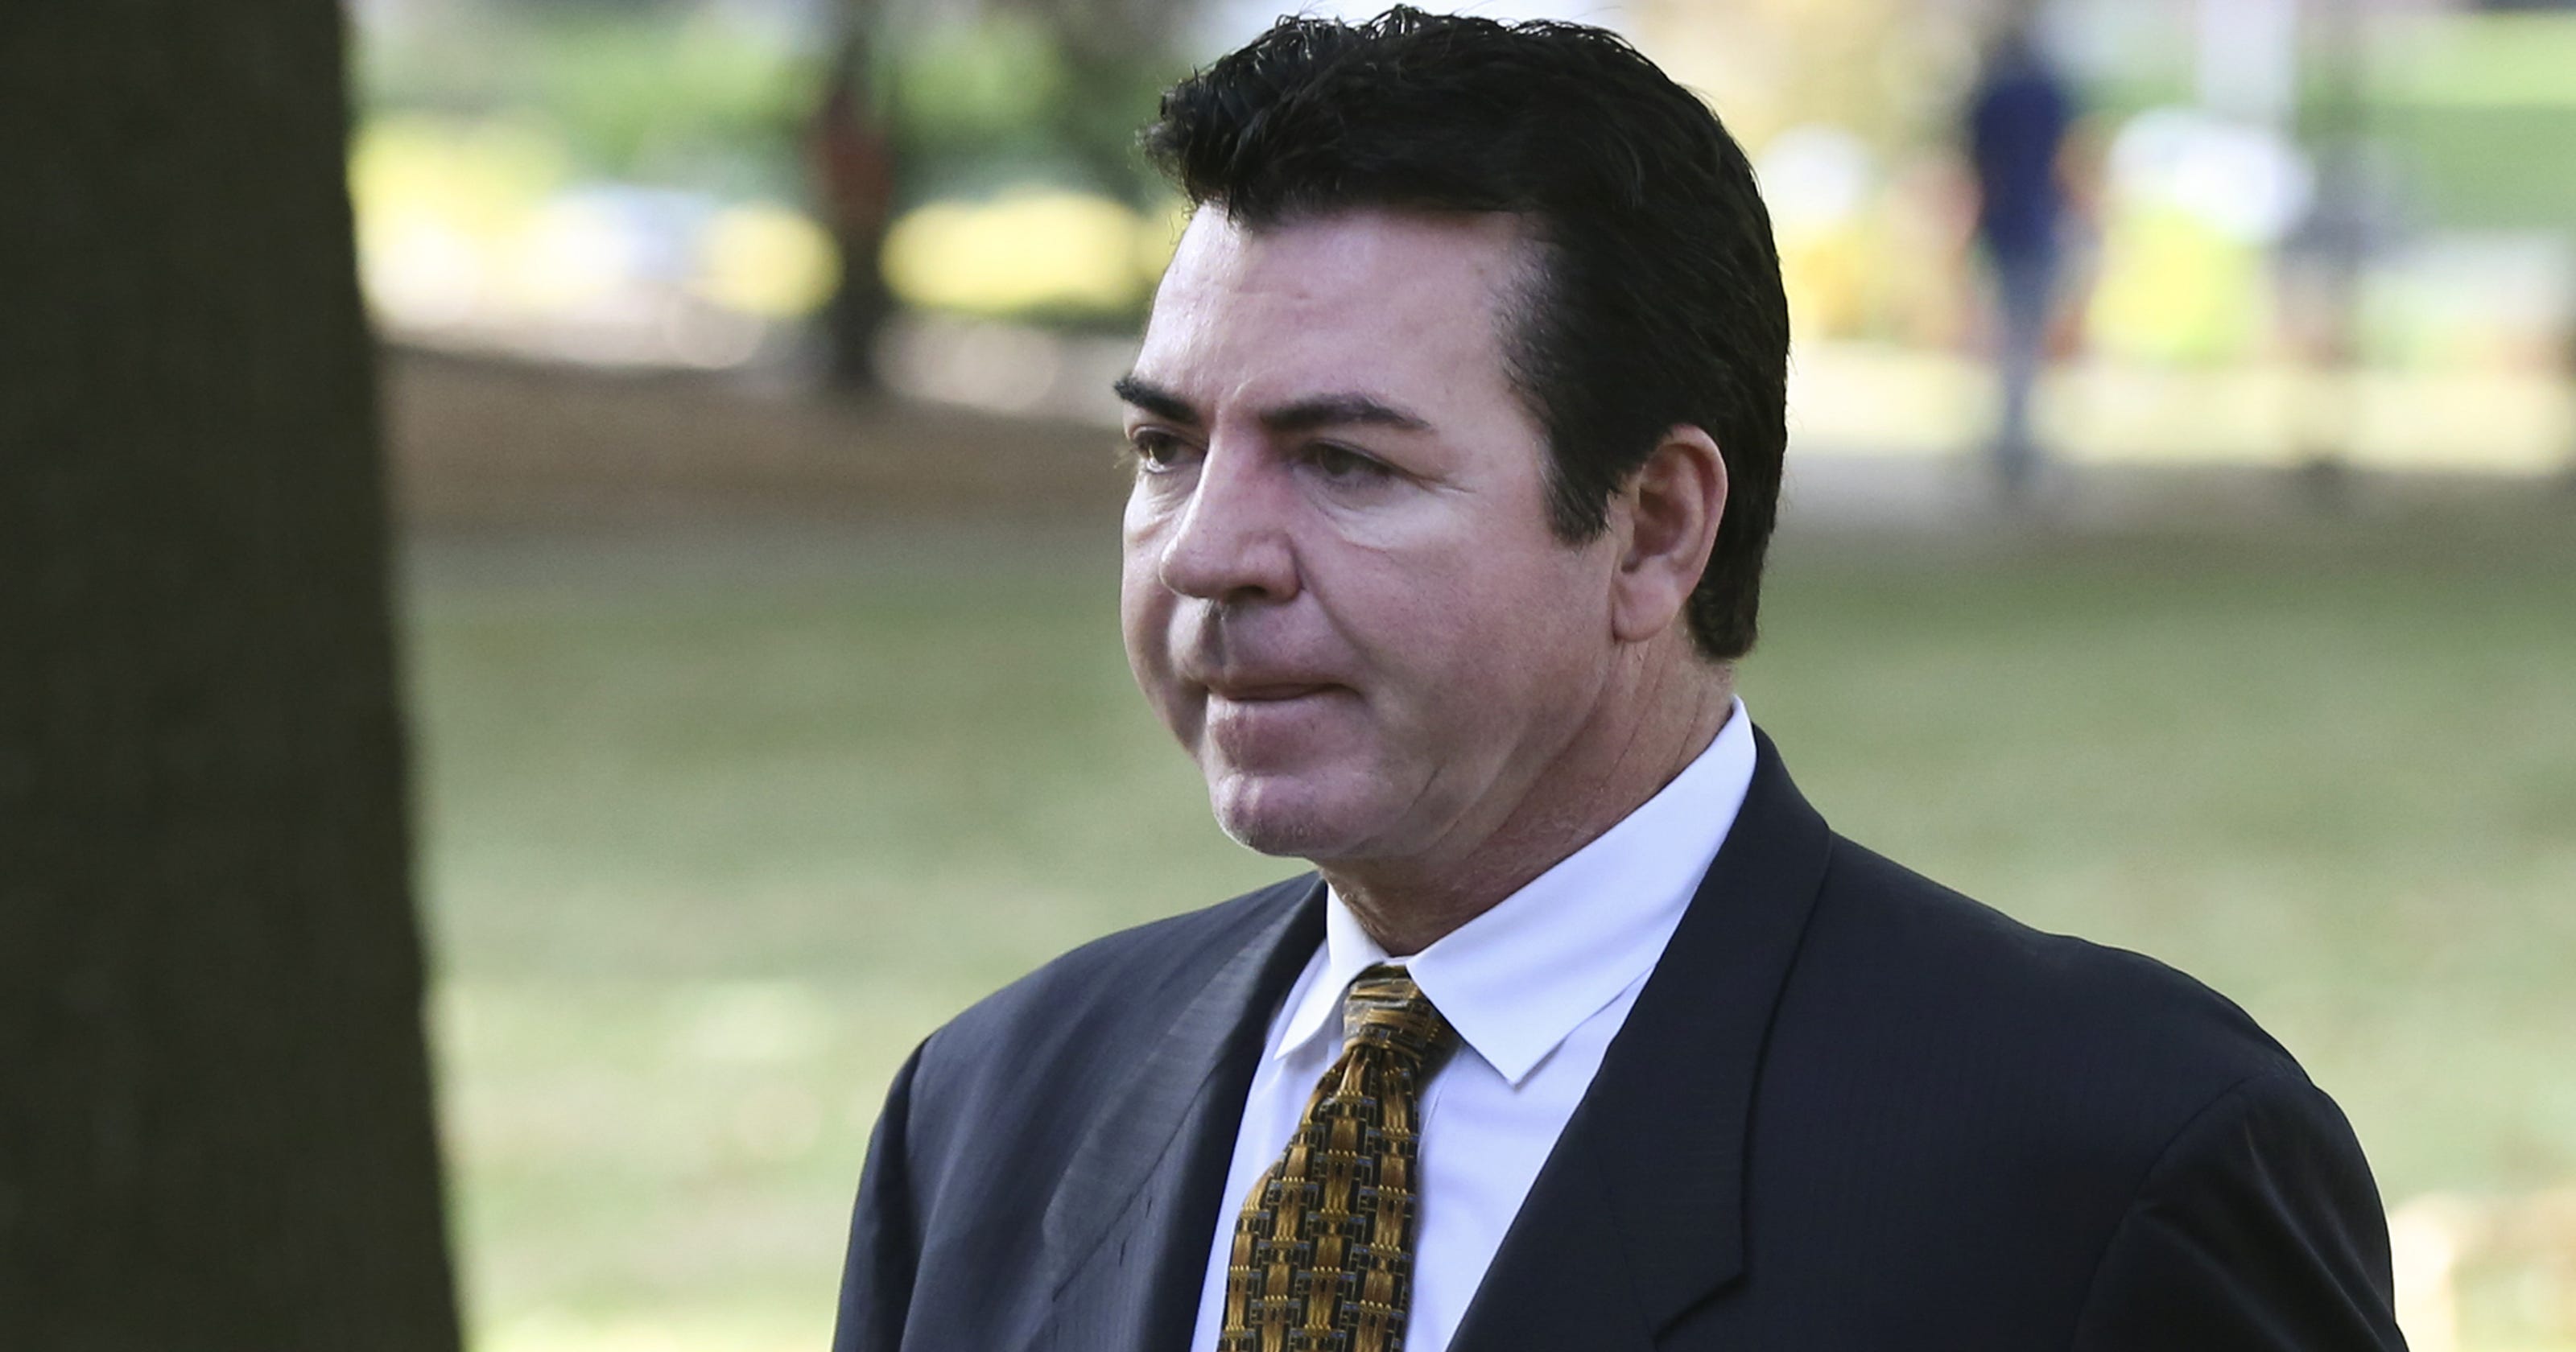 Papa John Schnatter Says New Ceo Created The N Word Scandal